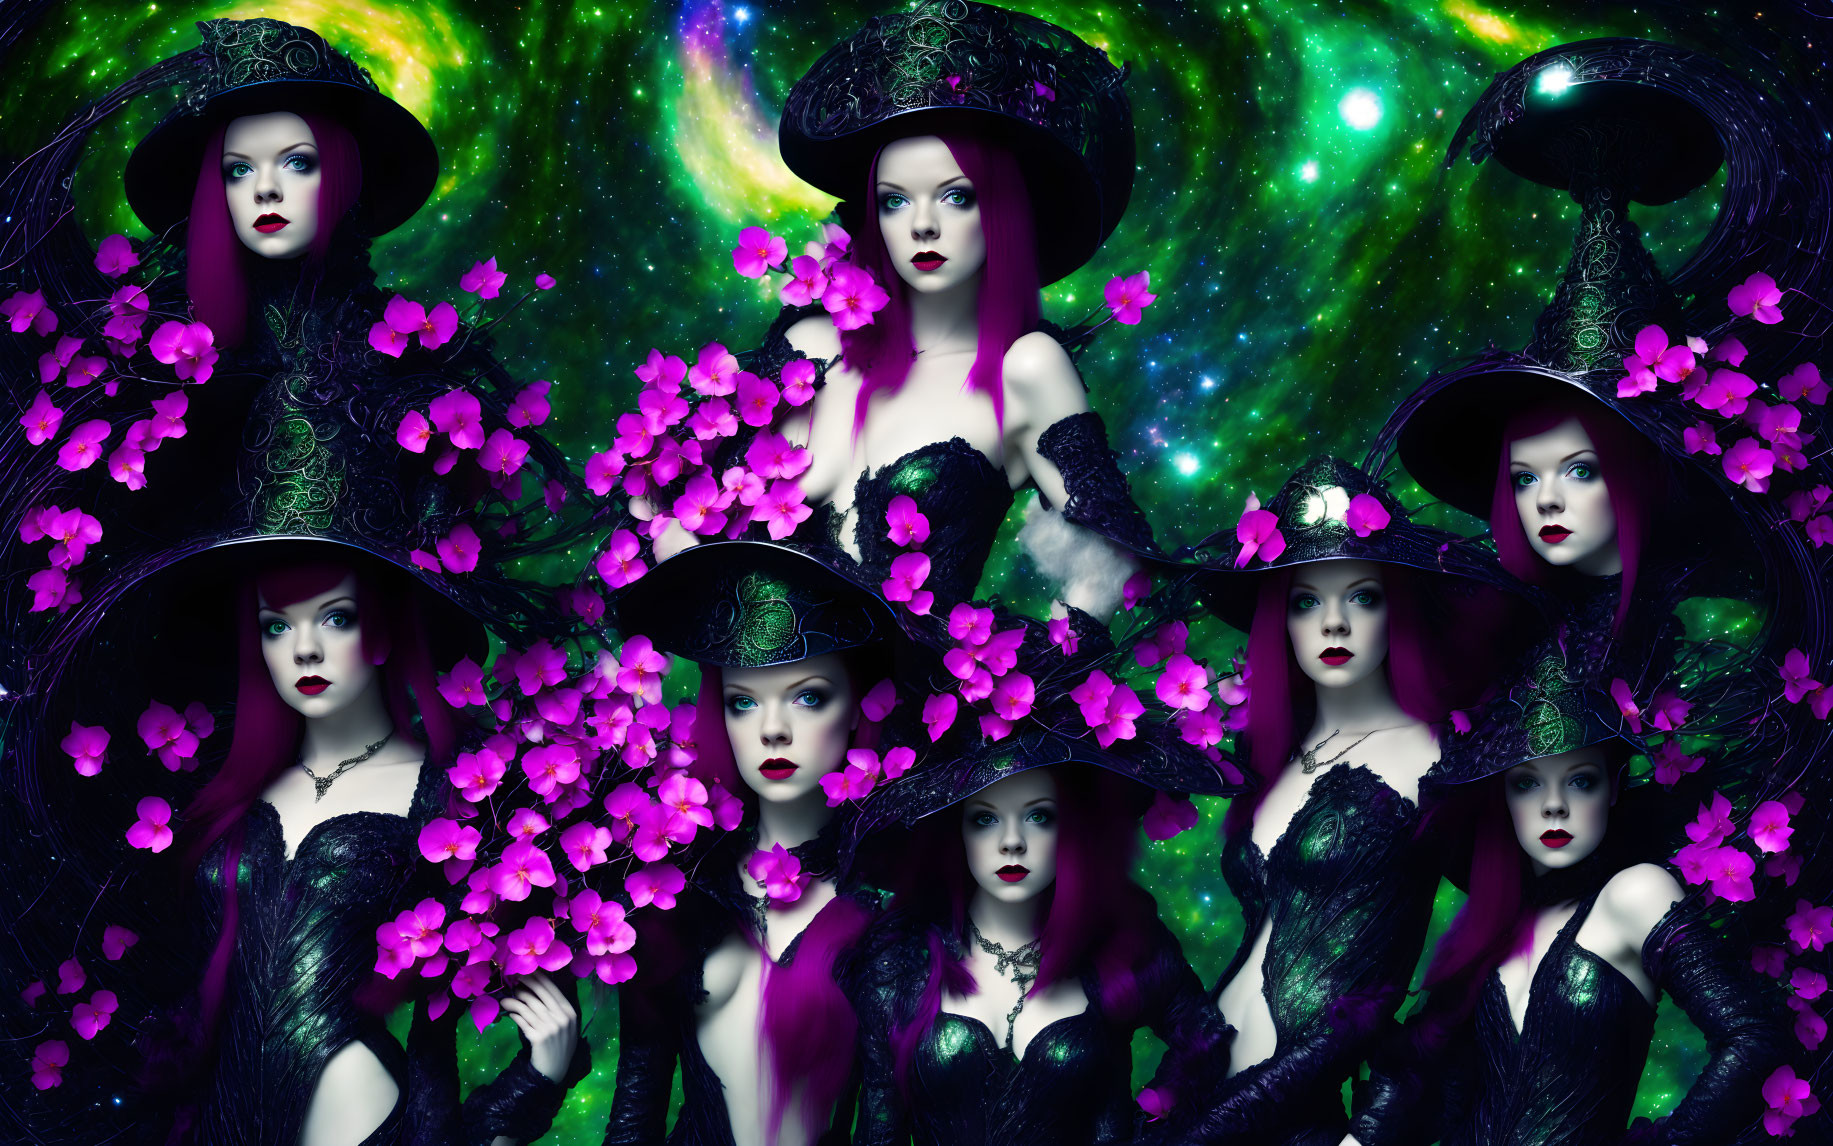 Identical Female Figures in Black Dresses & Hats Against Galaxy Background